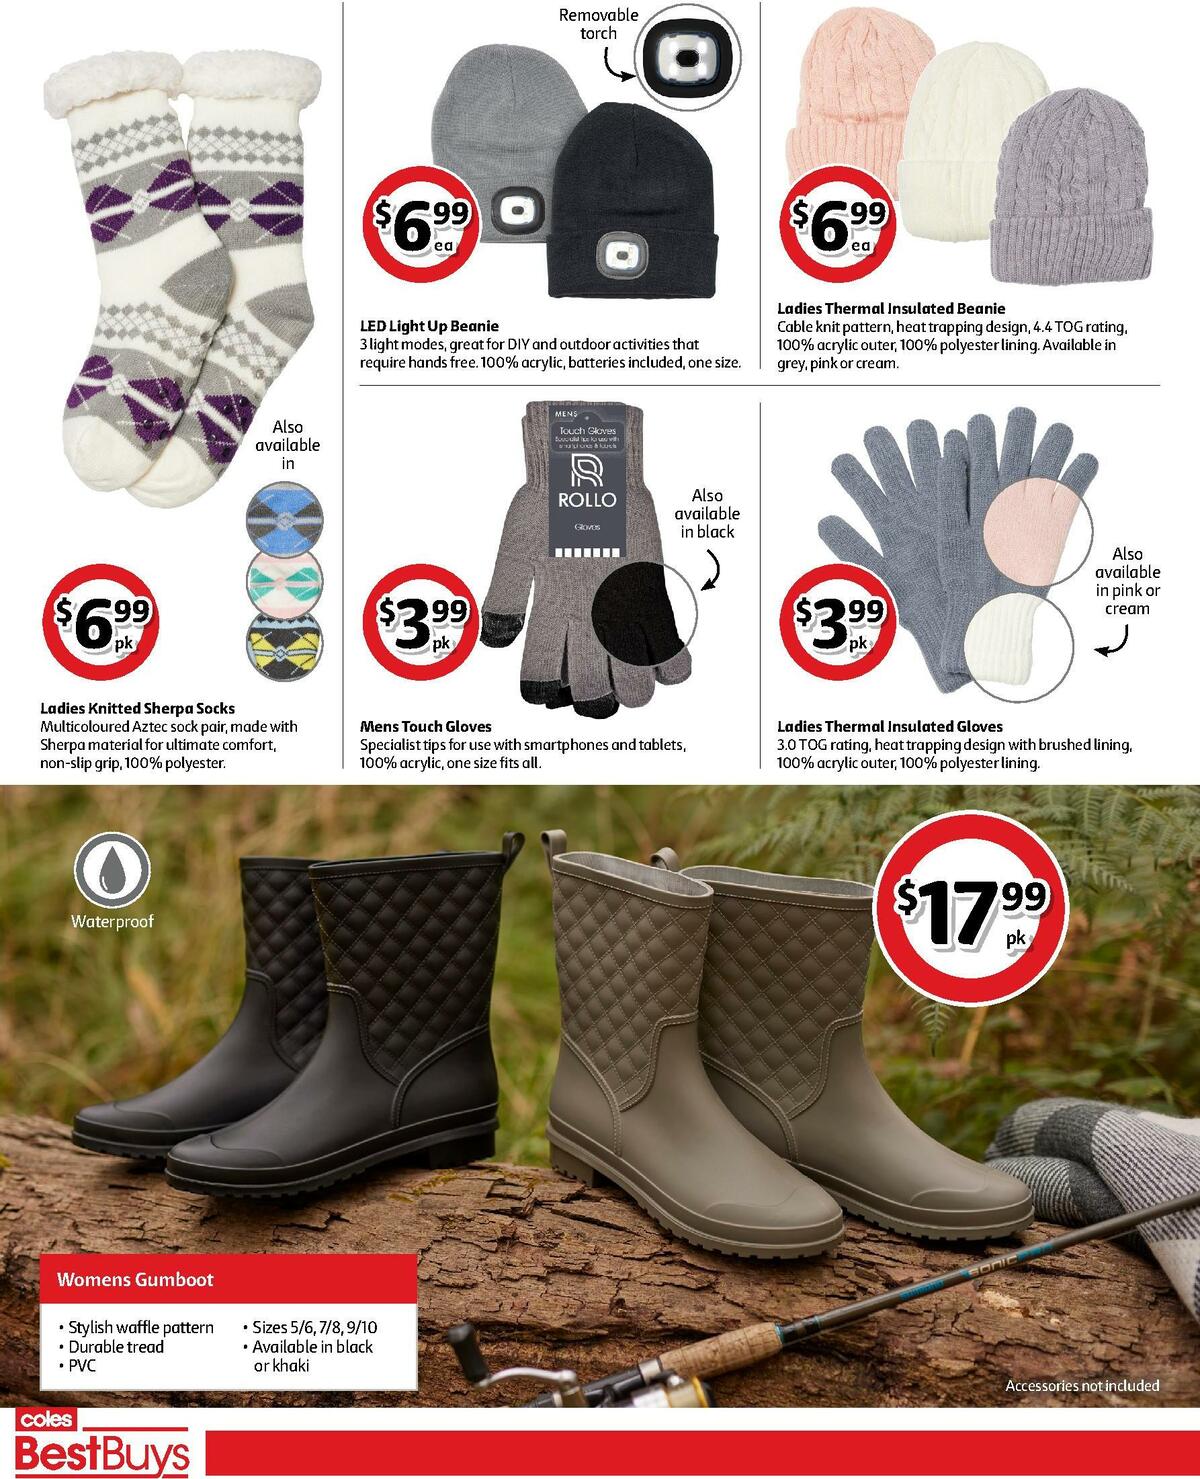 Coles Best Buys - Winter Adventures Catalogues from 6 May